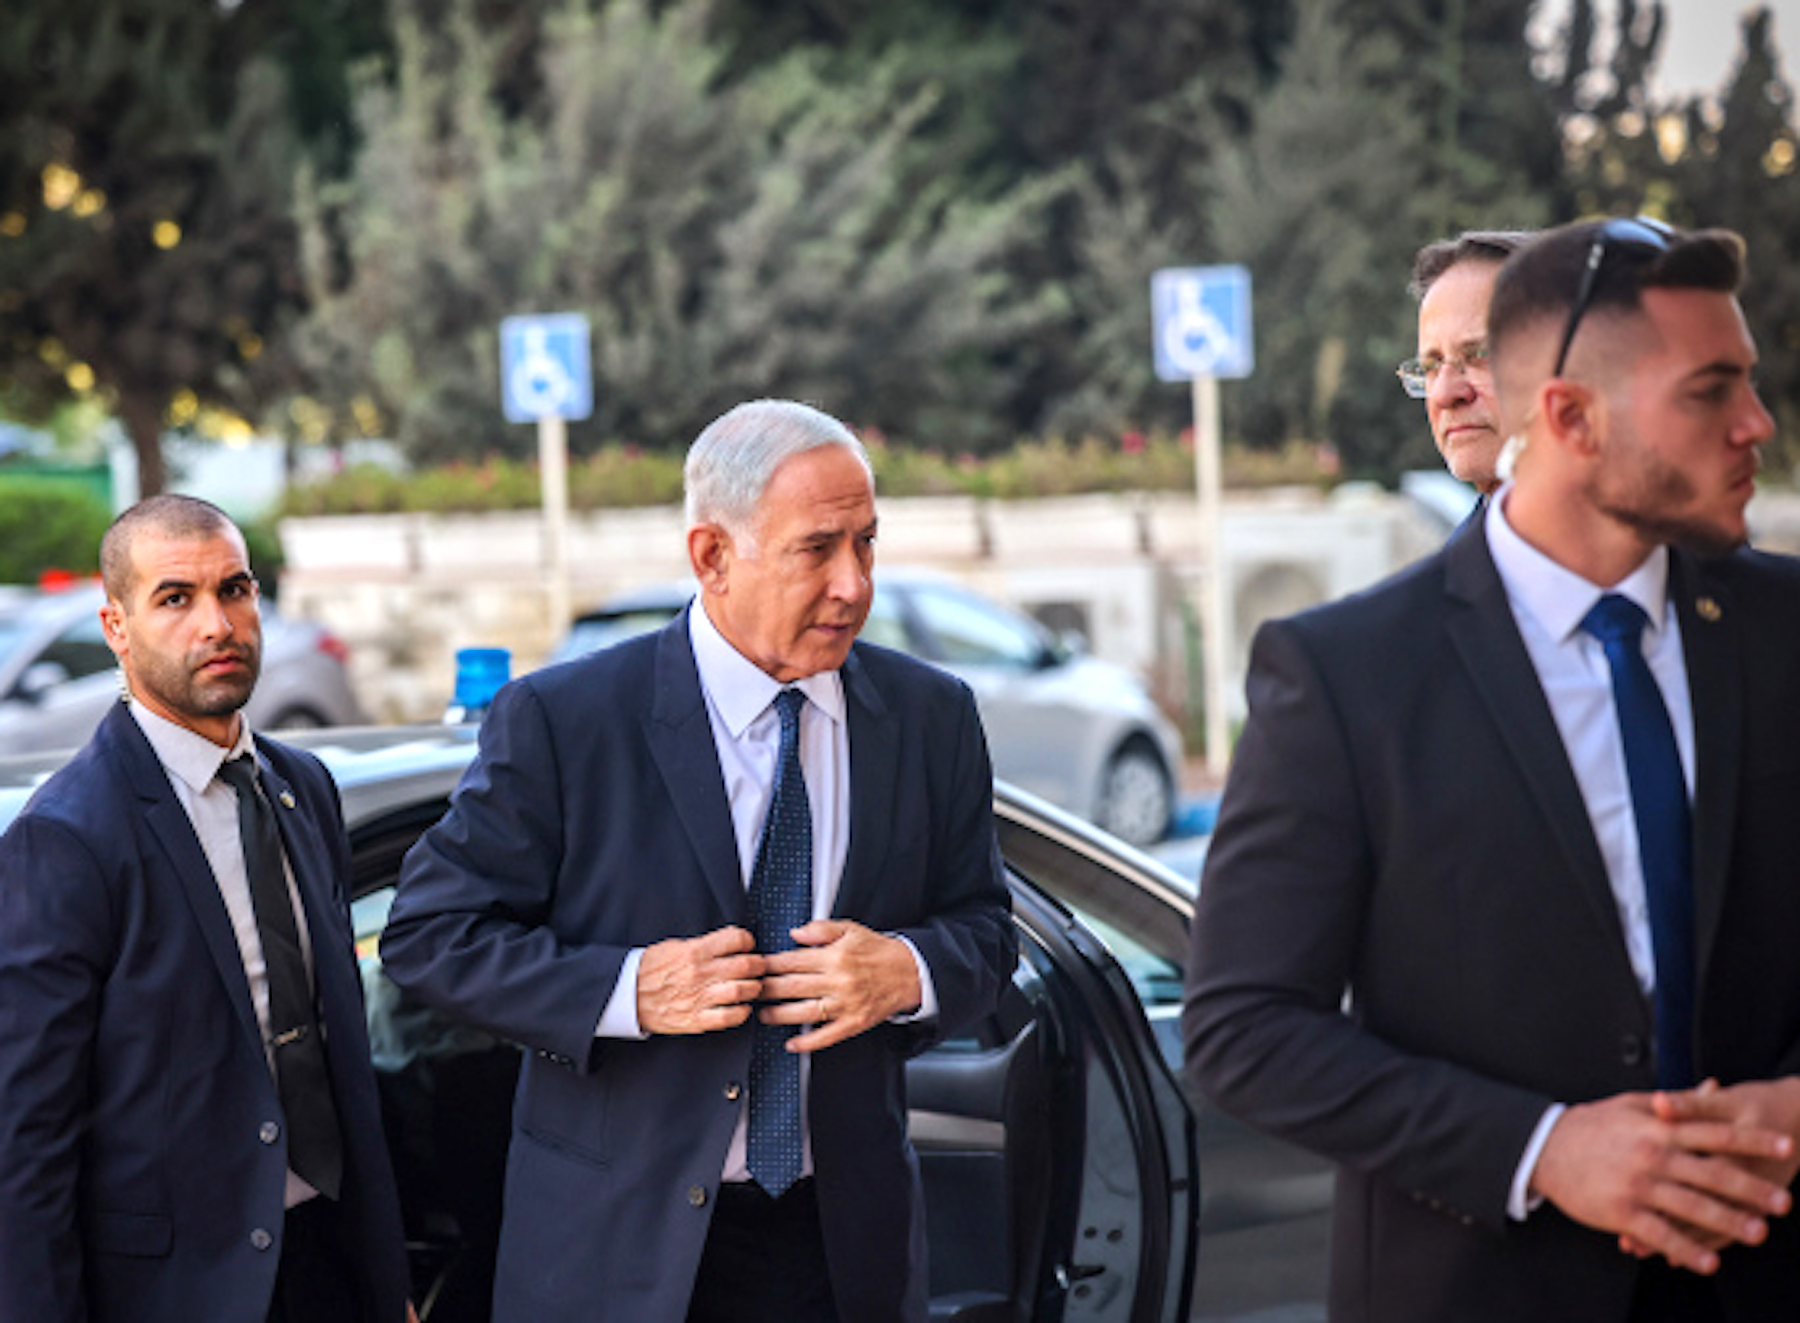 Netanyahu asks for patience as coalition negotiations ramp up